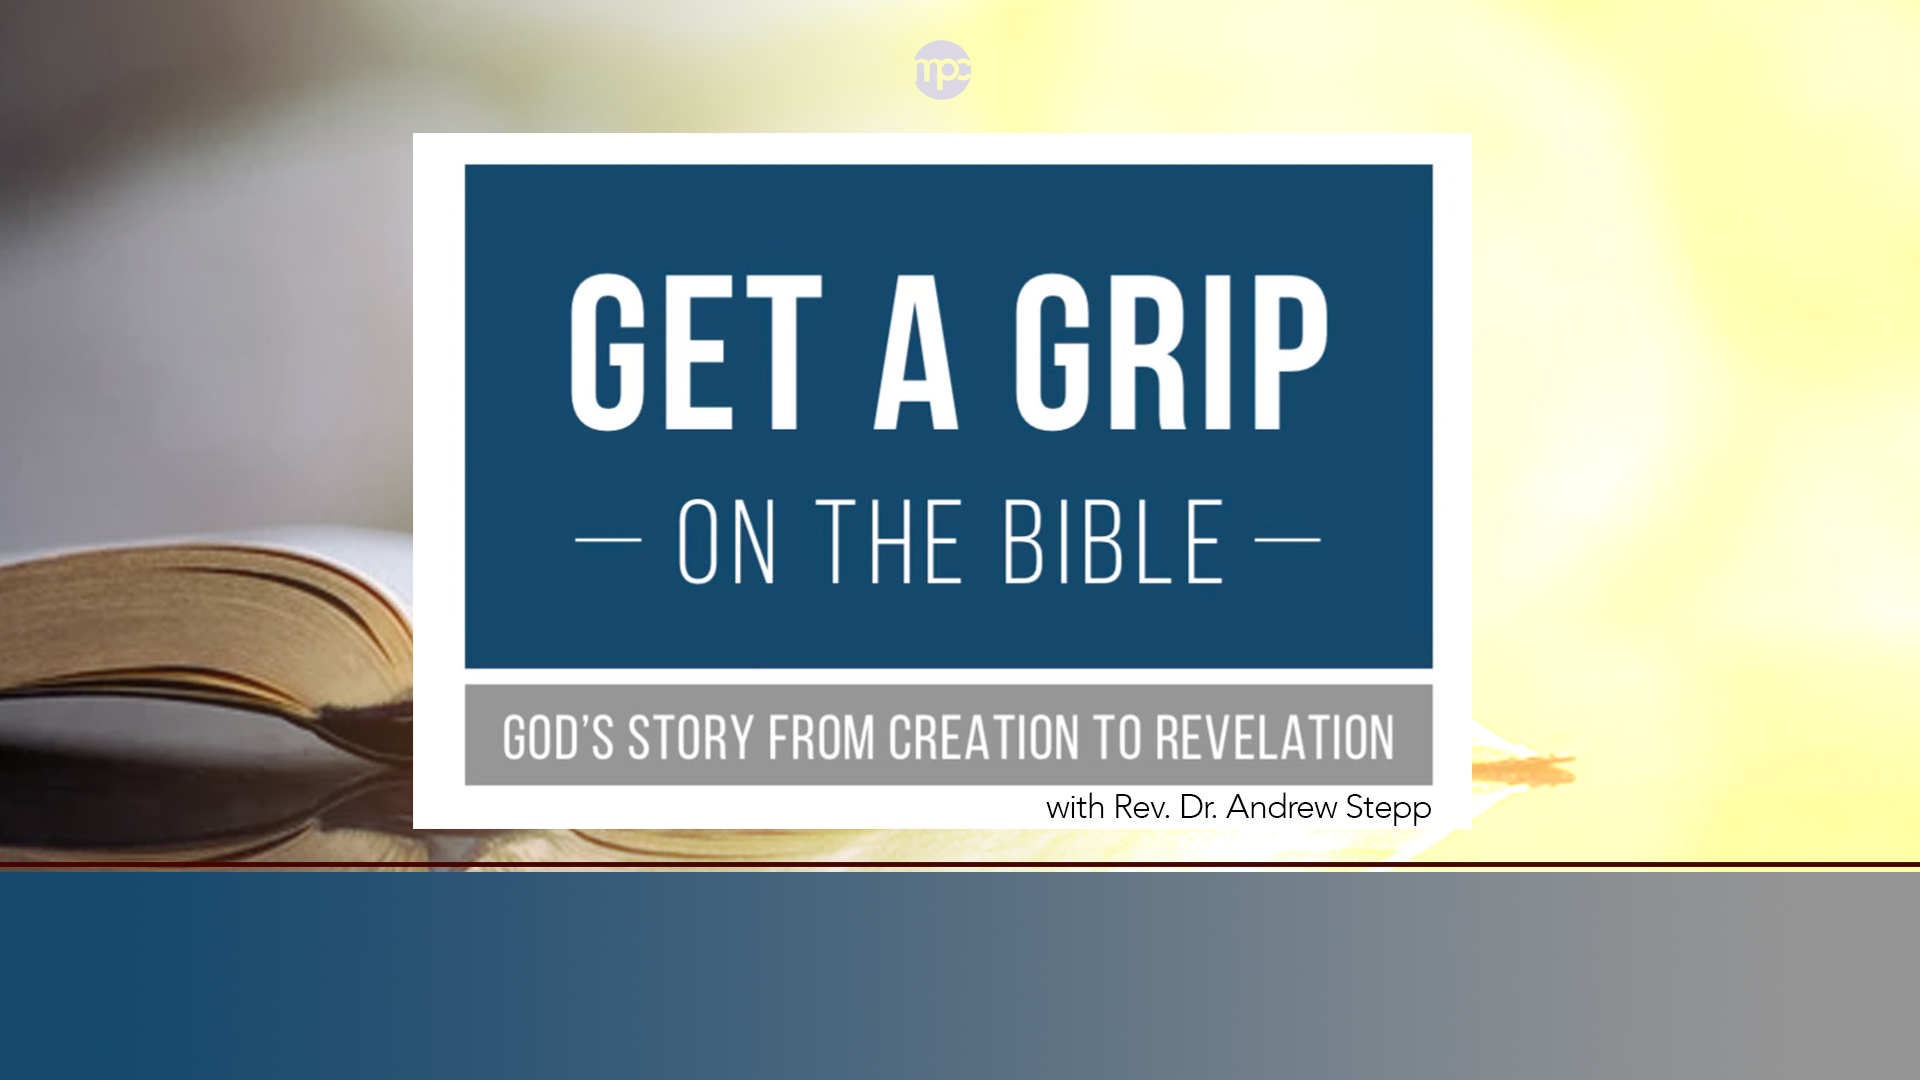 'Get A Grip on the Bible' Class

A 11-week class that walks through the redemption story from Creation to Revelation, chronicling the themes and major events of Biblical history. 
